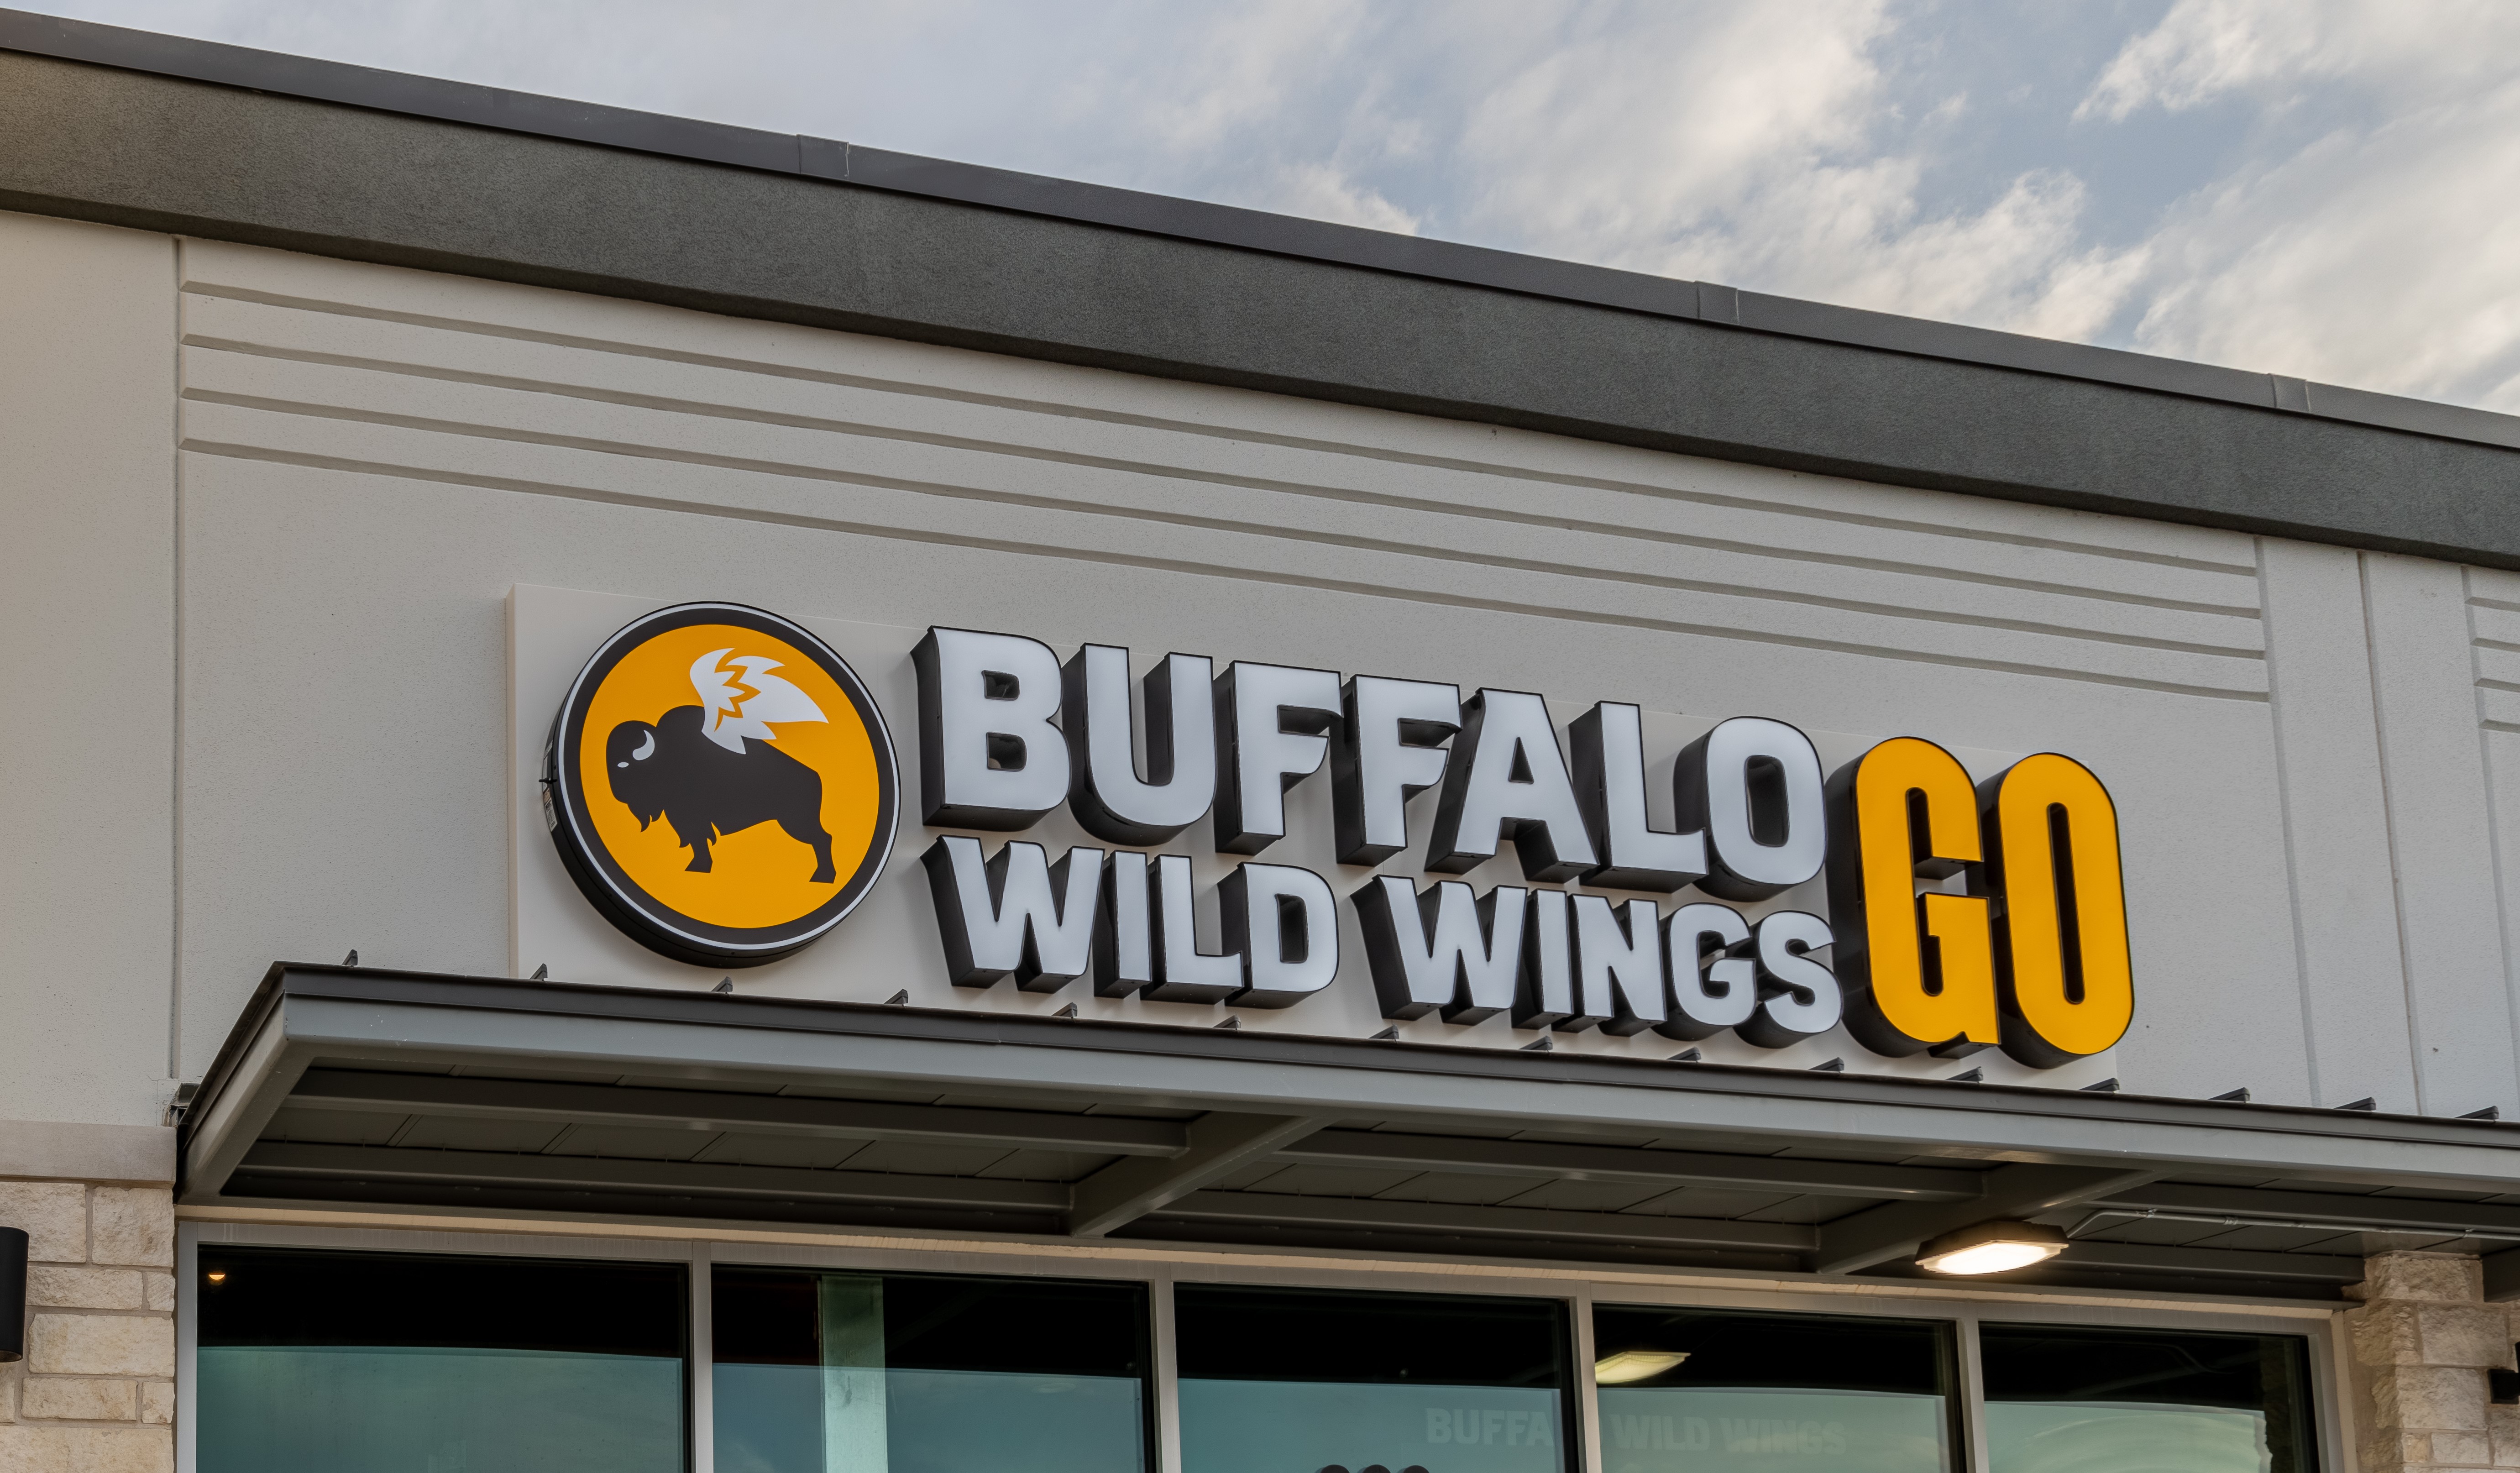 Wild Wings introduces GO brand to - cleveland.com